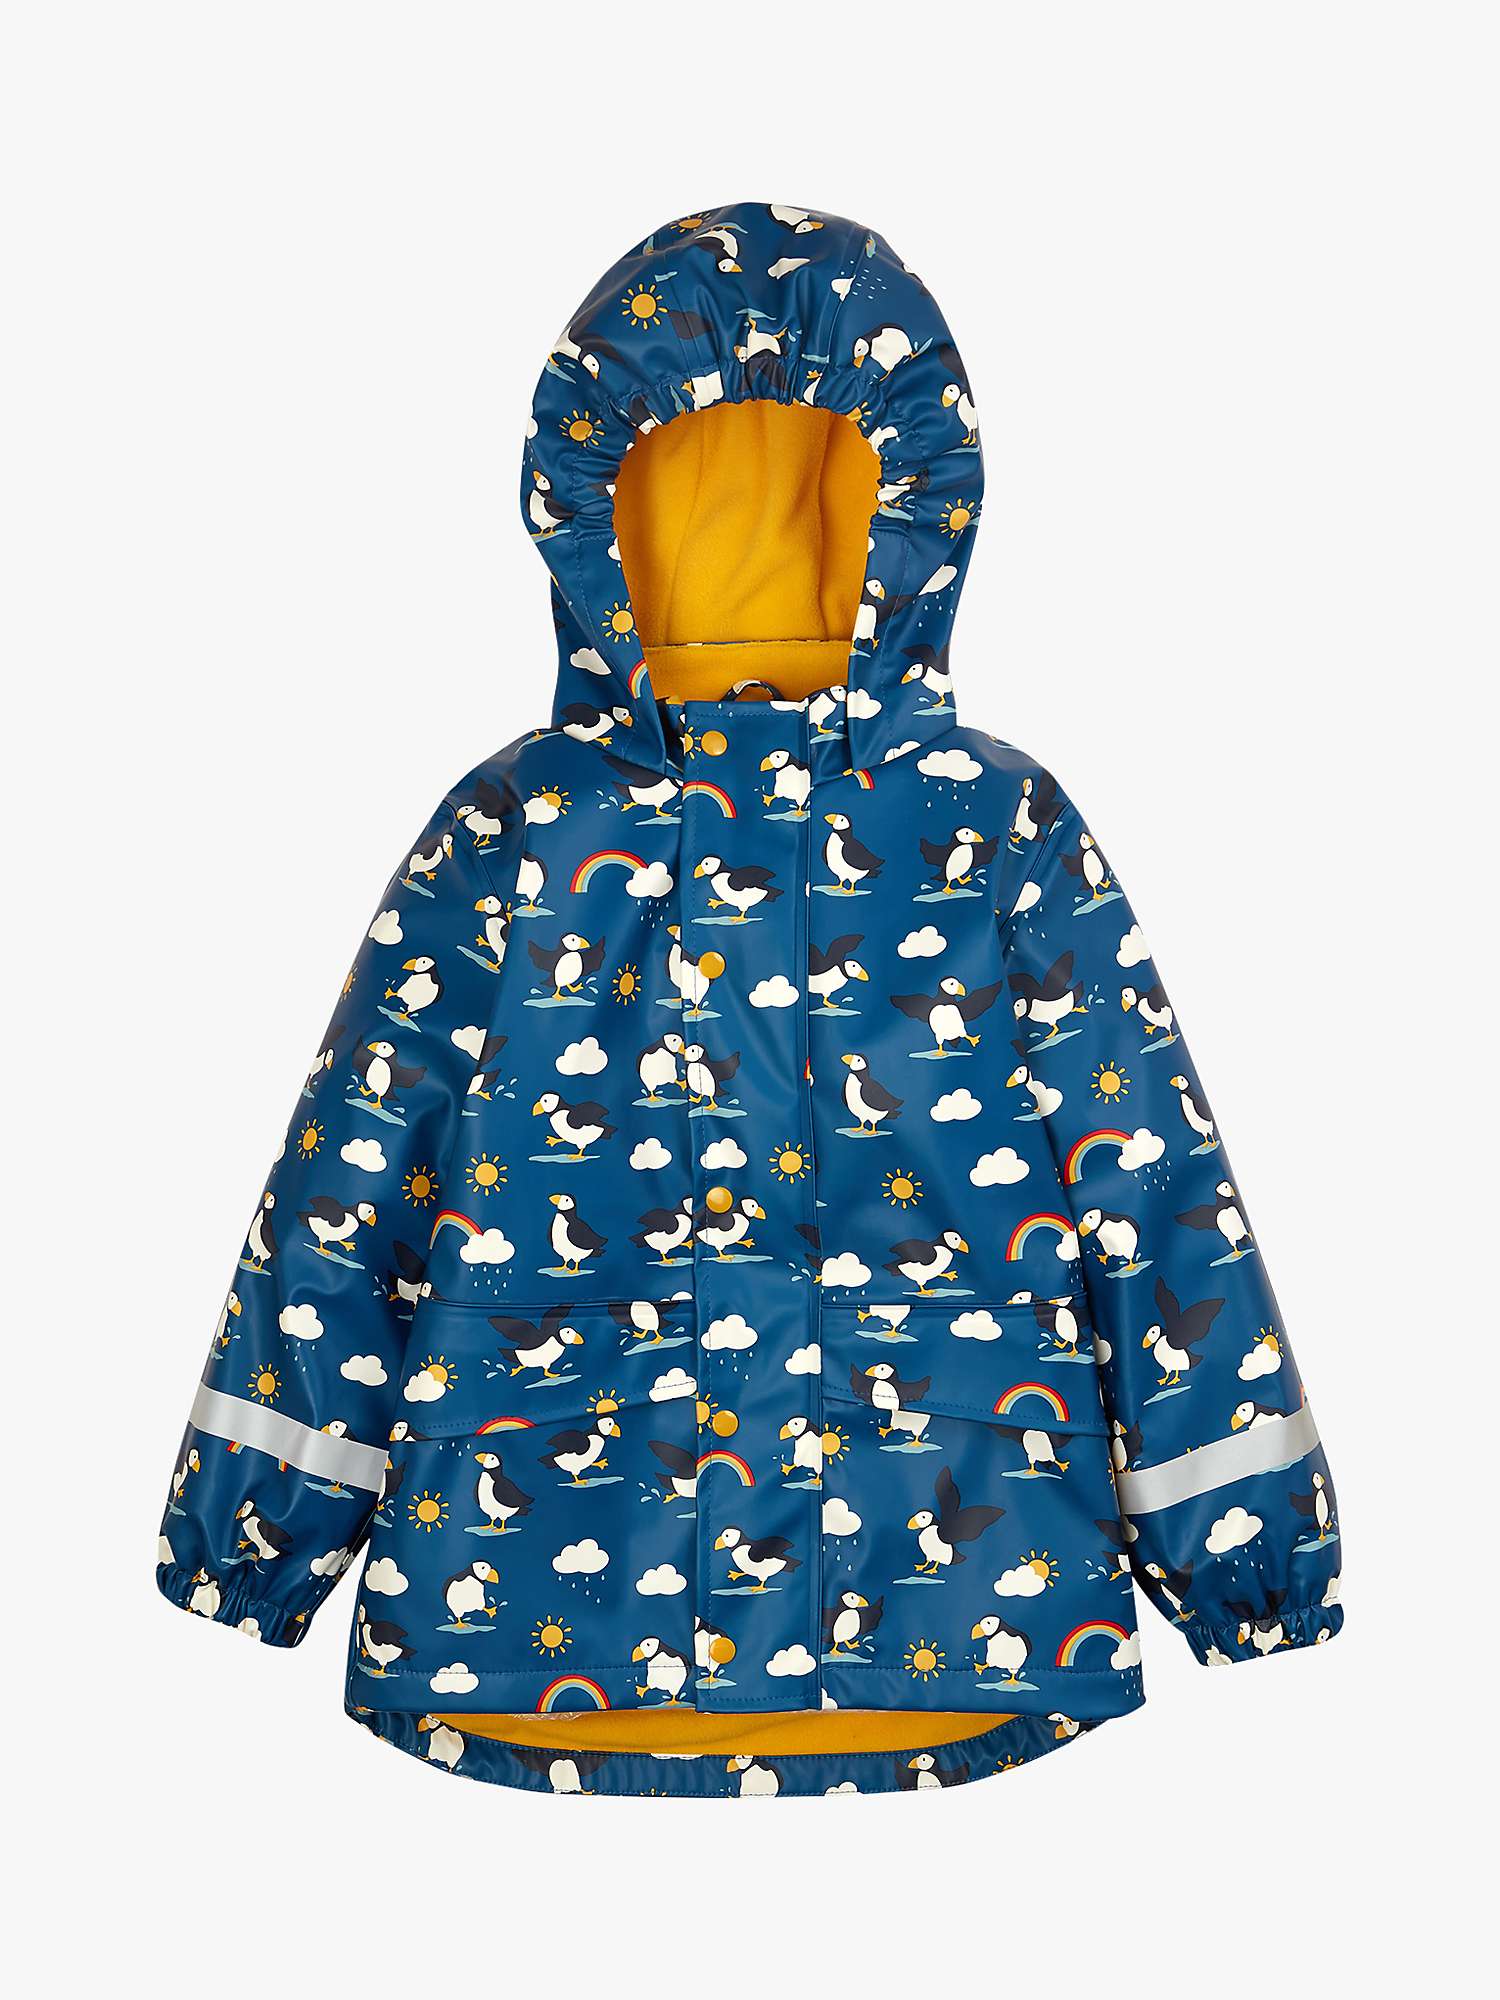 Buy Frugi Kids' Puddle Buster Puffin Puddles Waterproof Coat, Multi Online at johnlewis.com